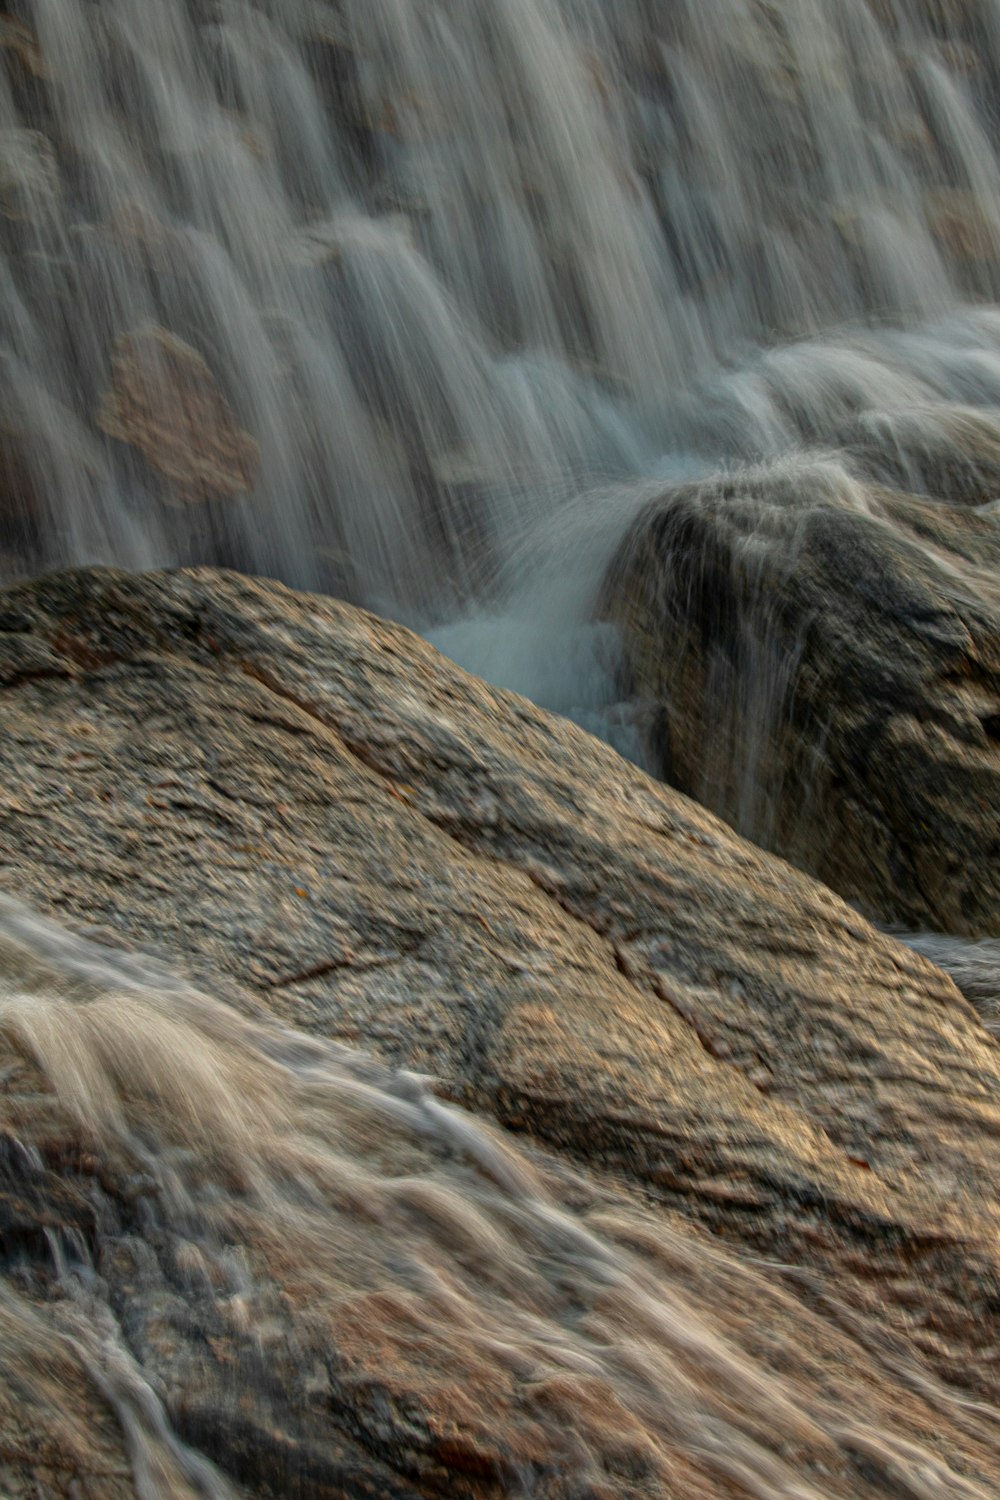 a close up of a waterfall with rocks in the foreground